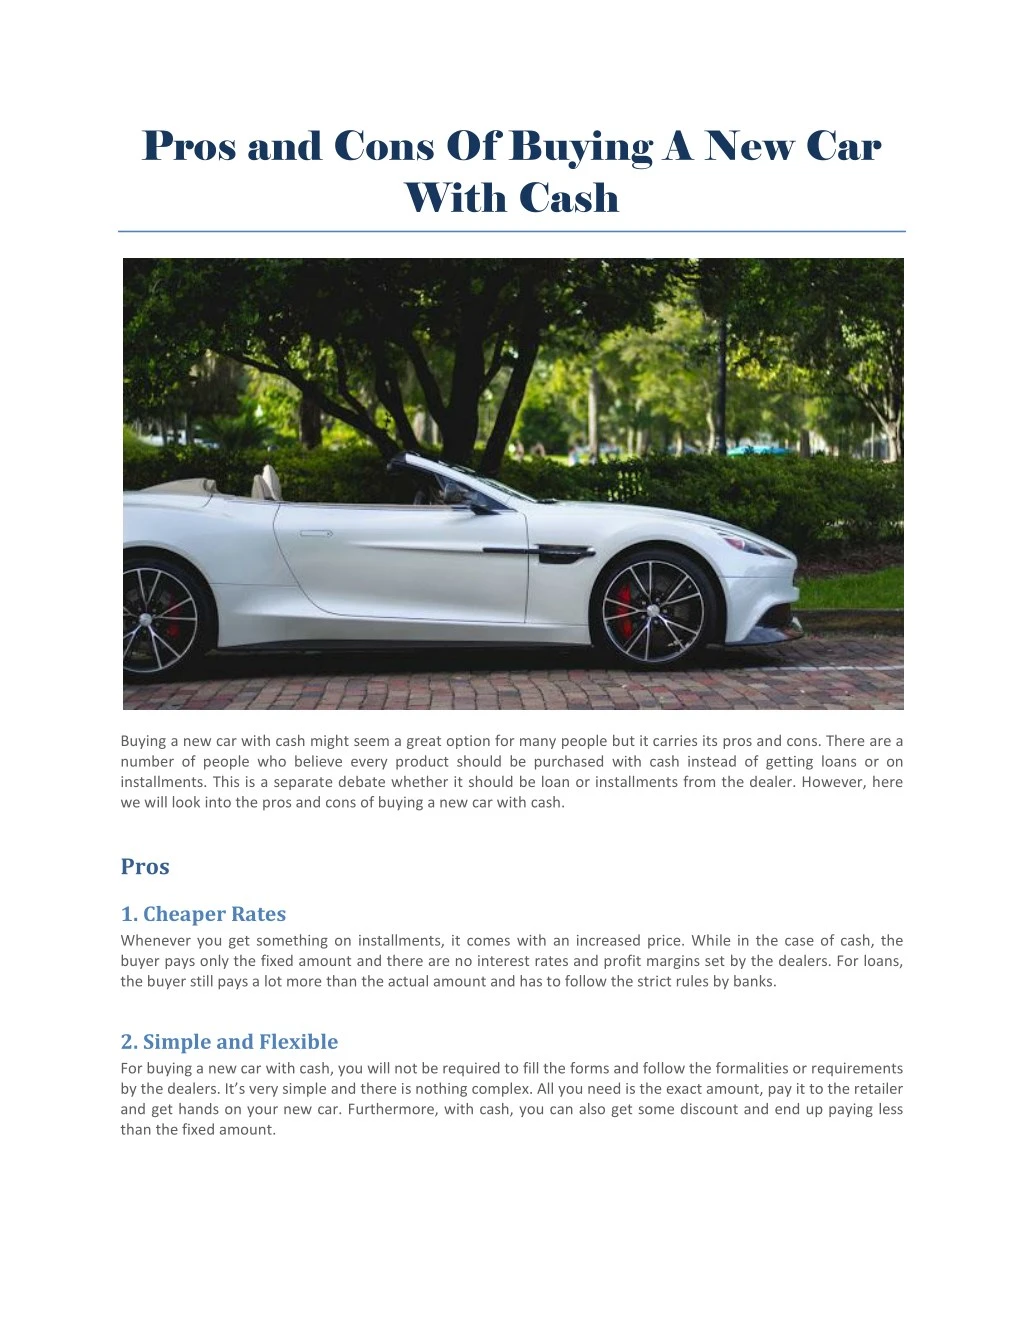 pros and cons of buying a new car with cash